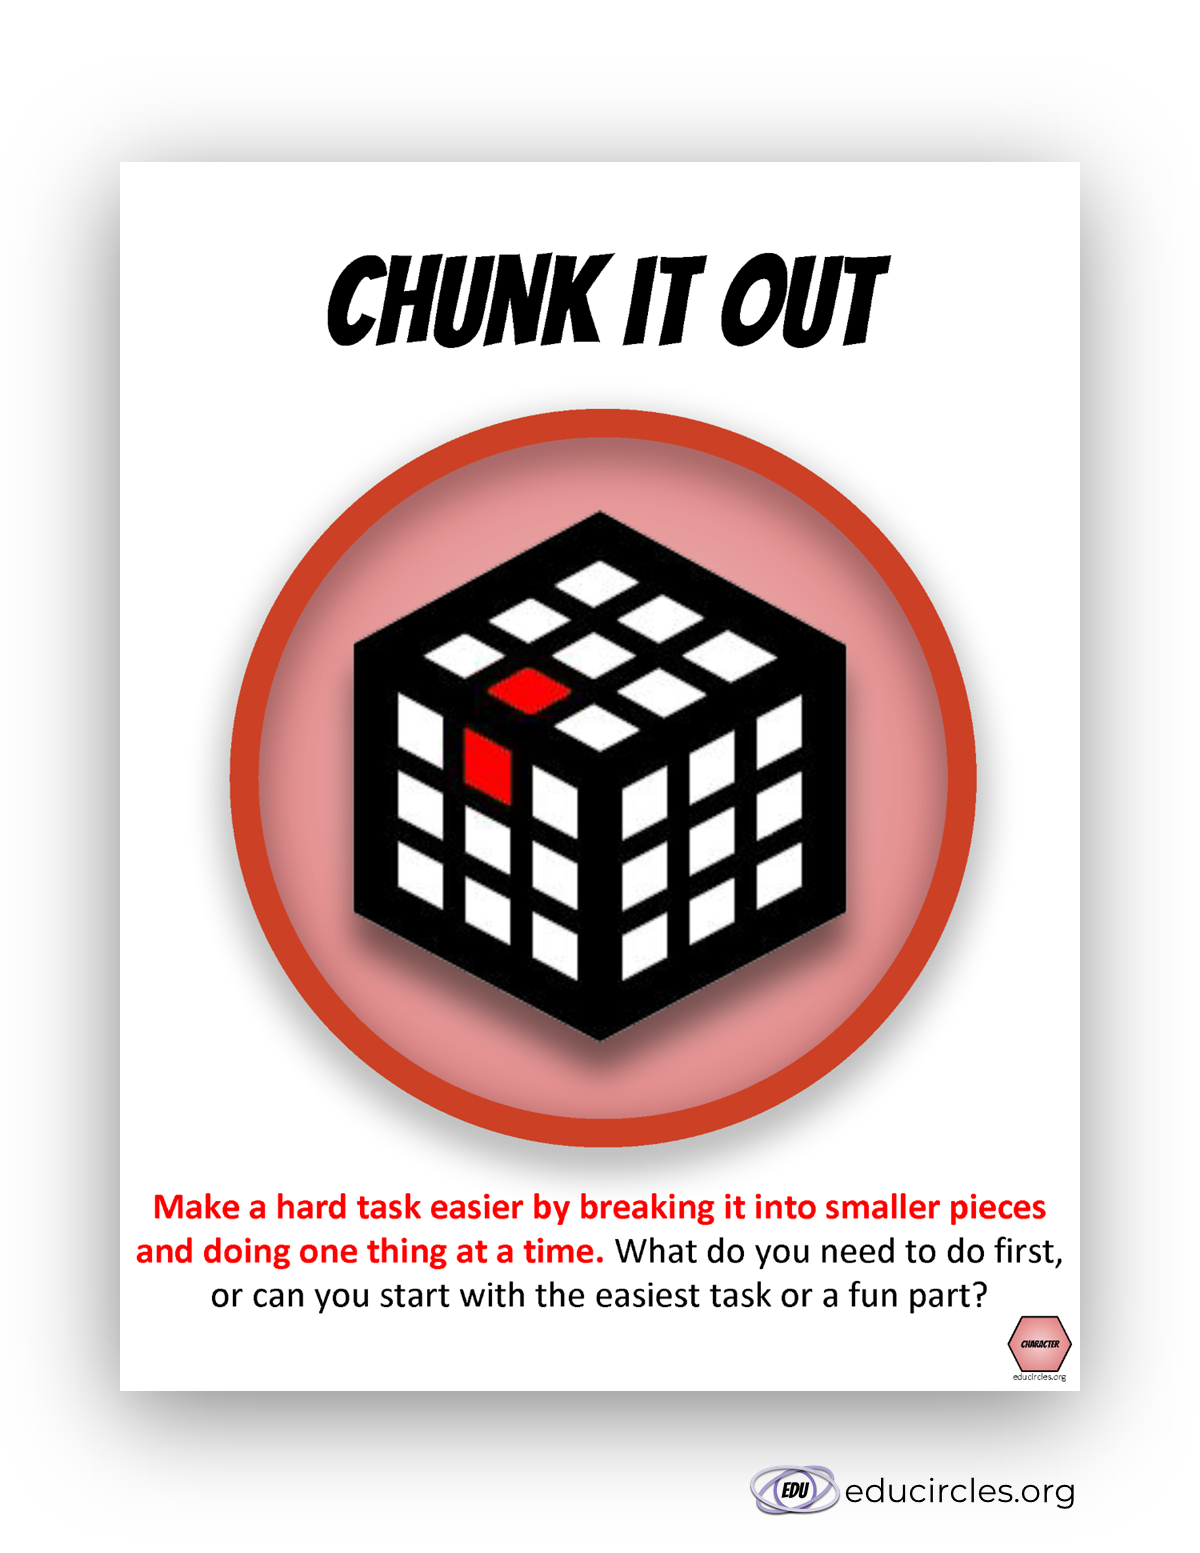 FREE Growth Mindset Poster PDF slide 2 - strategy: chunk it out